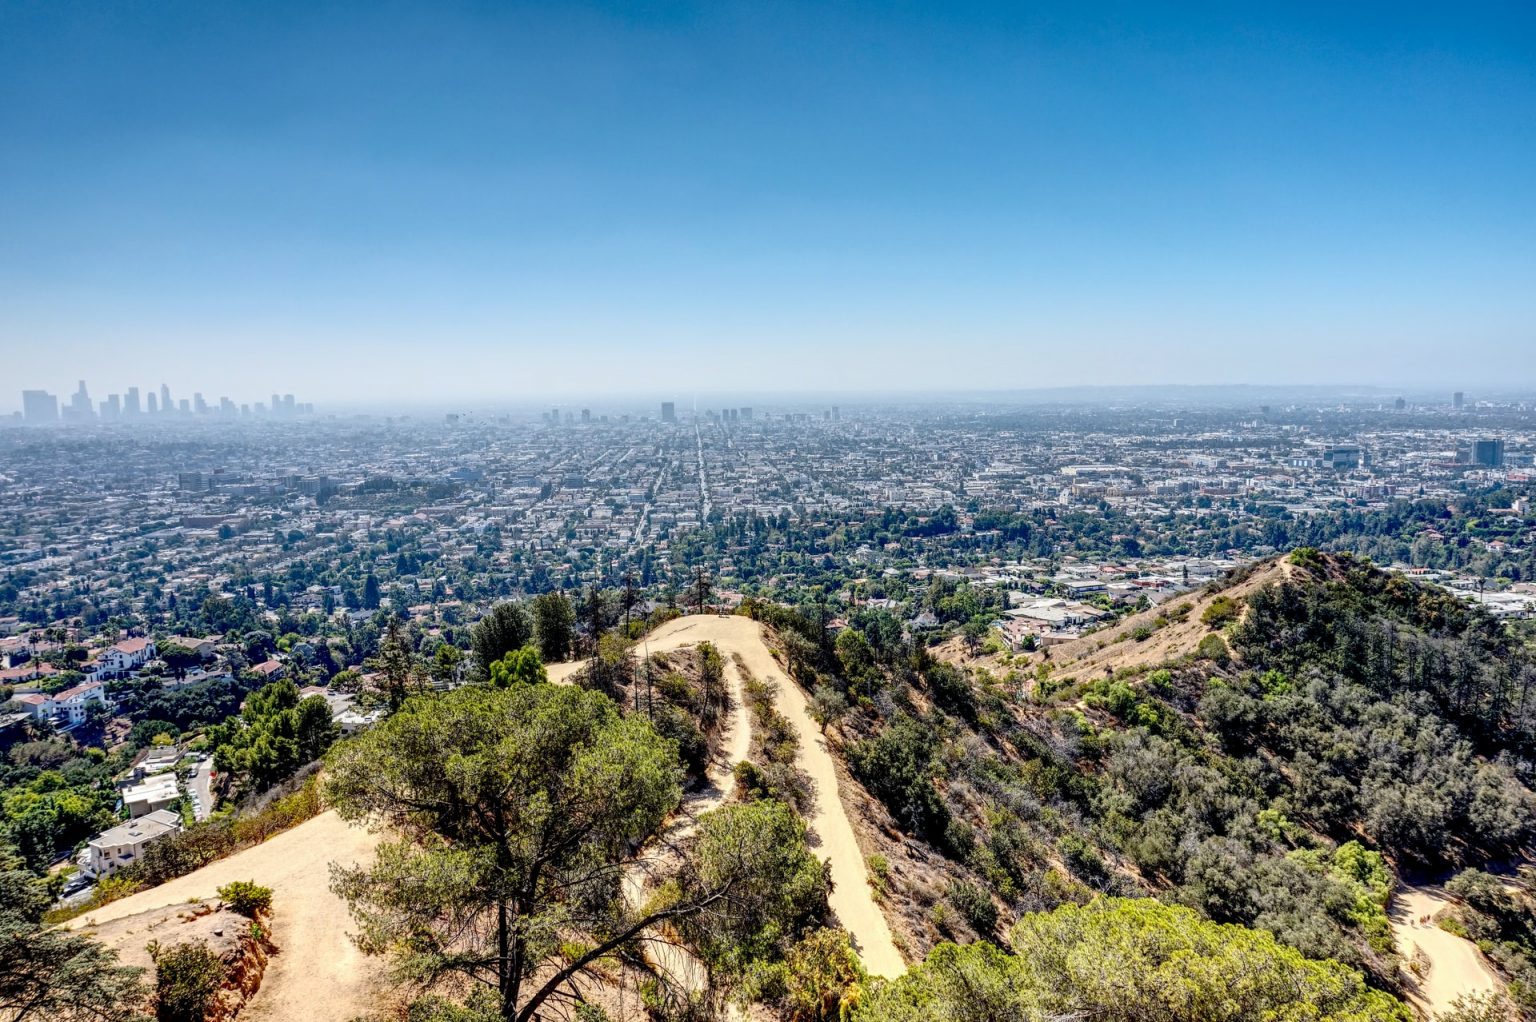 8 Attractions in Griffith Park for Art, Views, History, Fun Blog